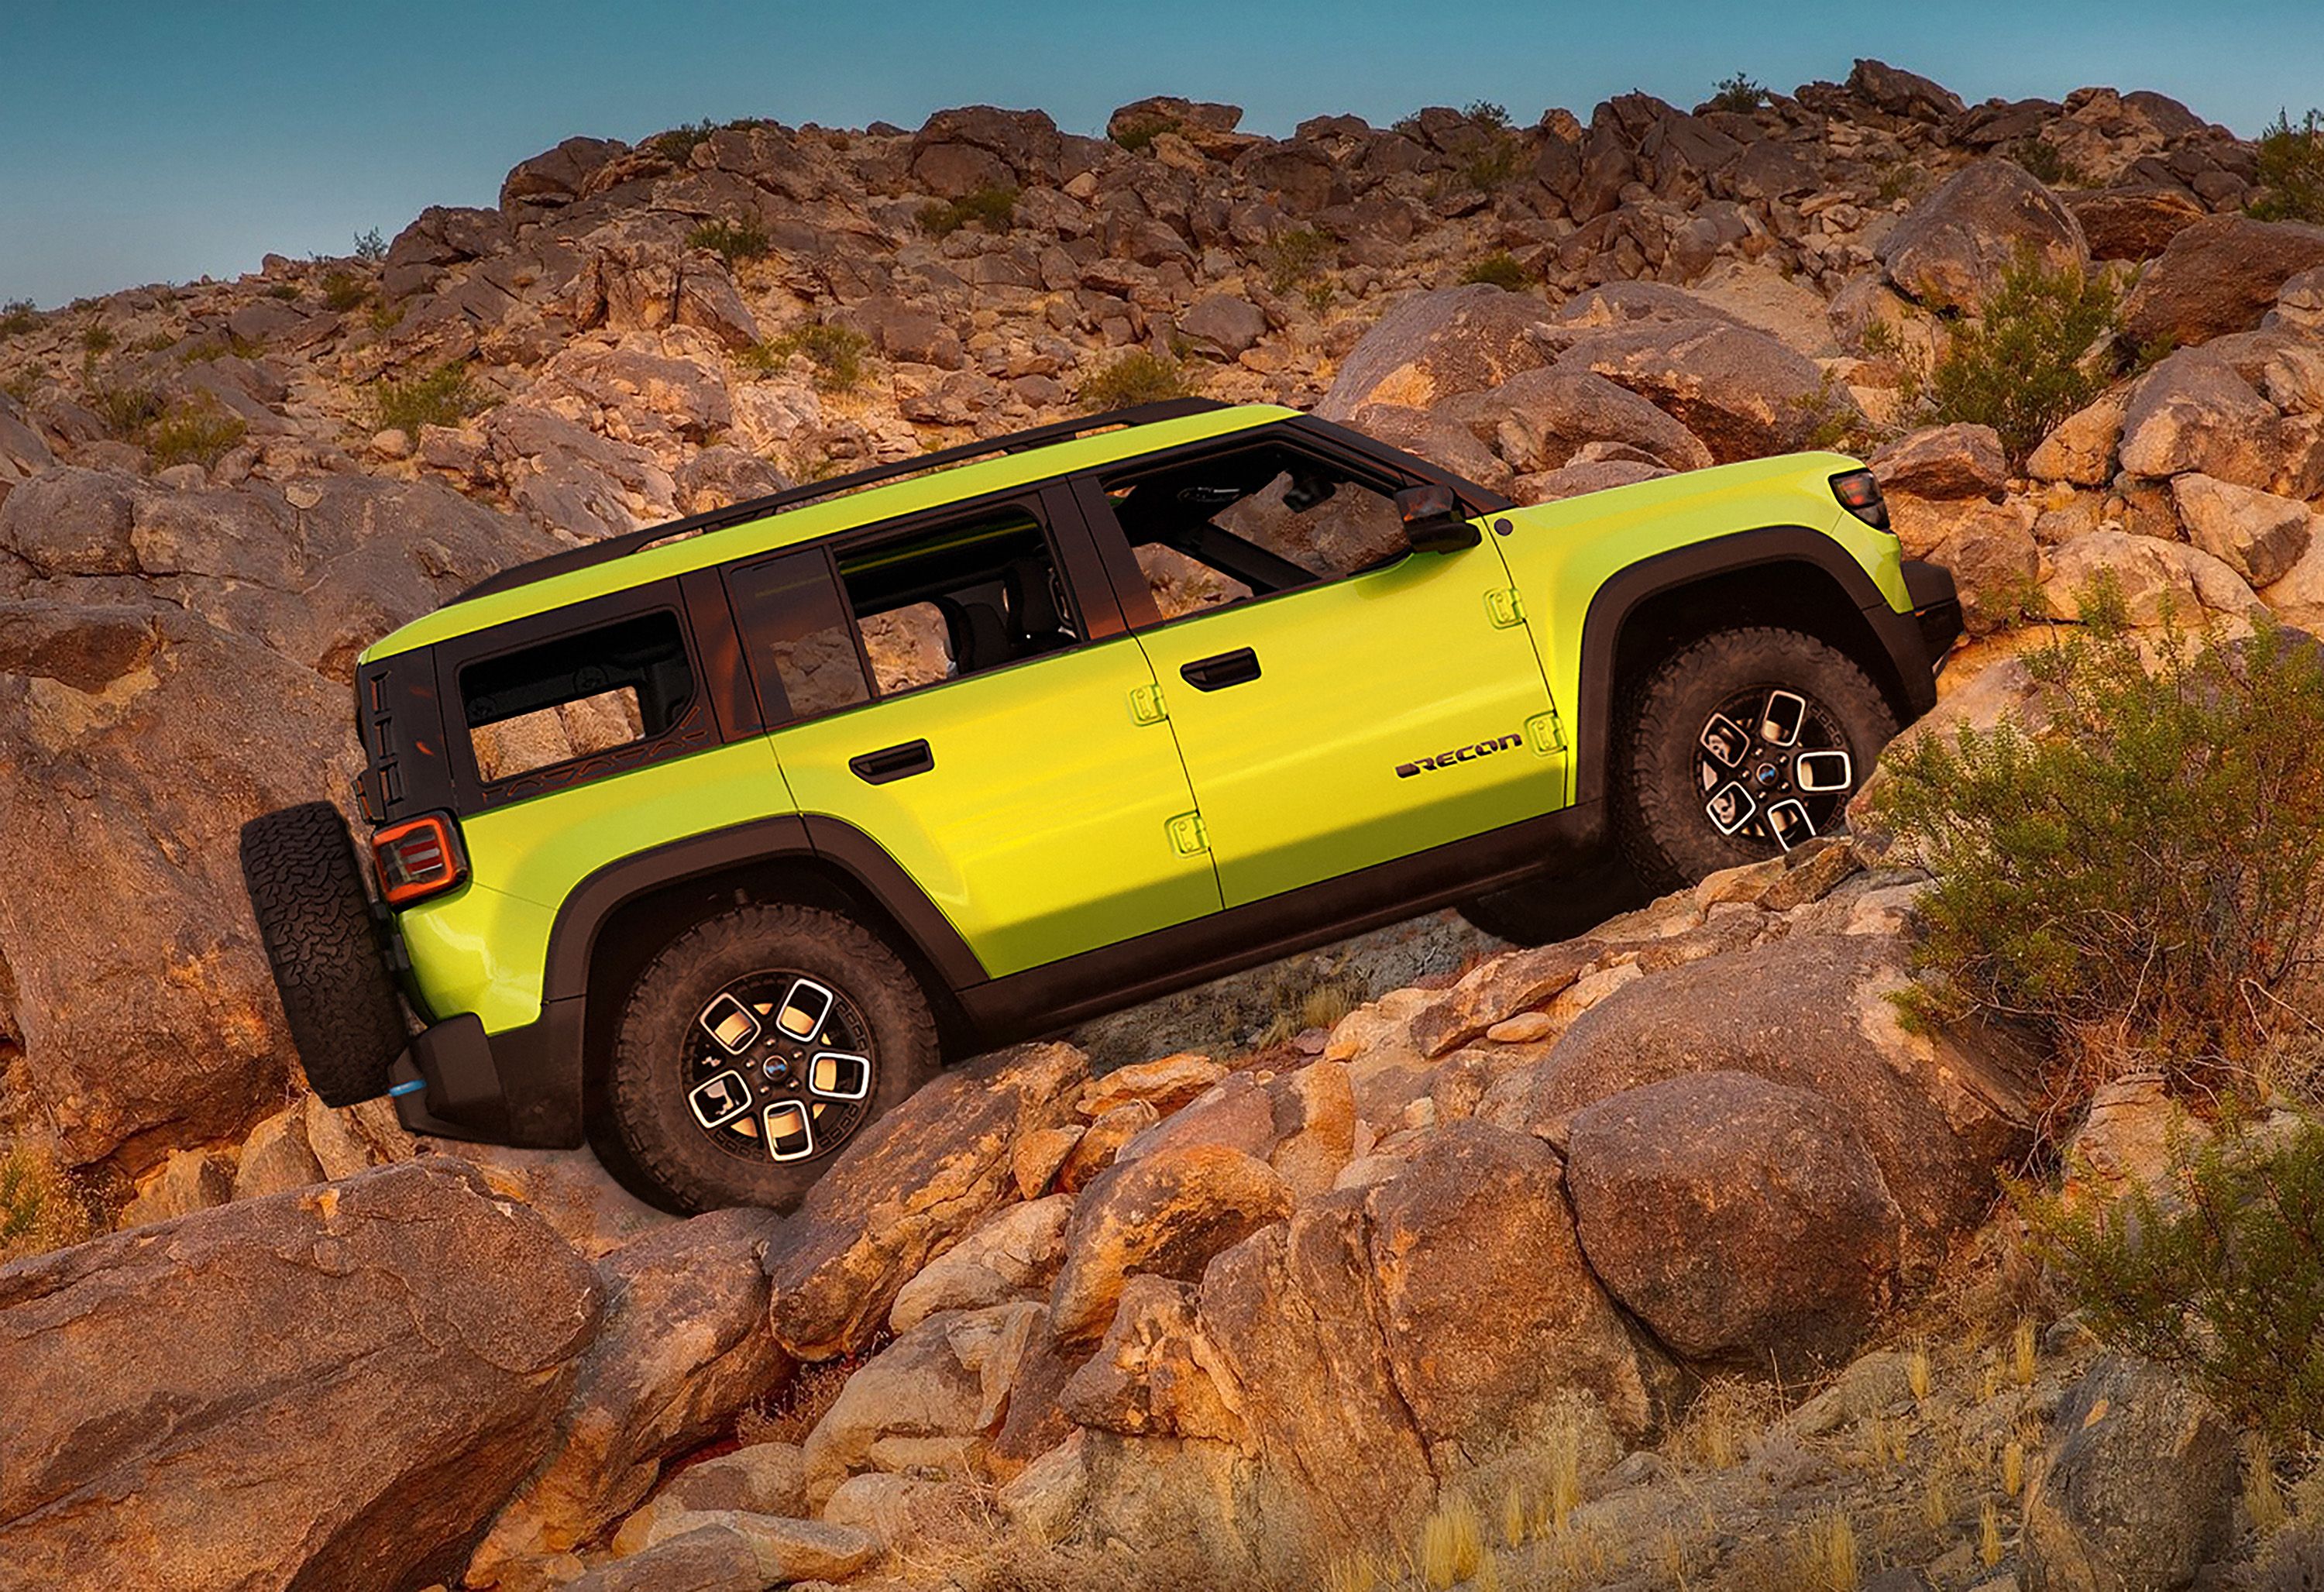 How Jeep Plans to Be Top 'Zero-Emission SUV Brand in the World